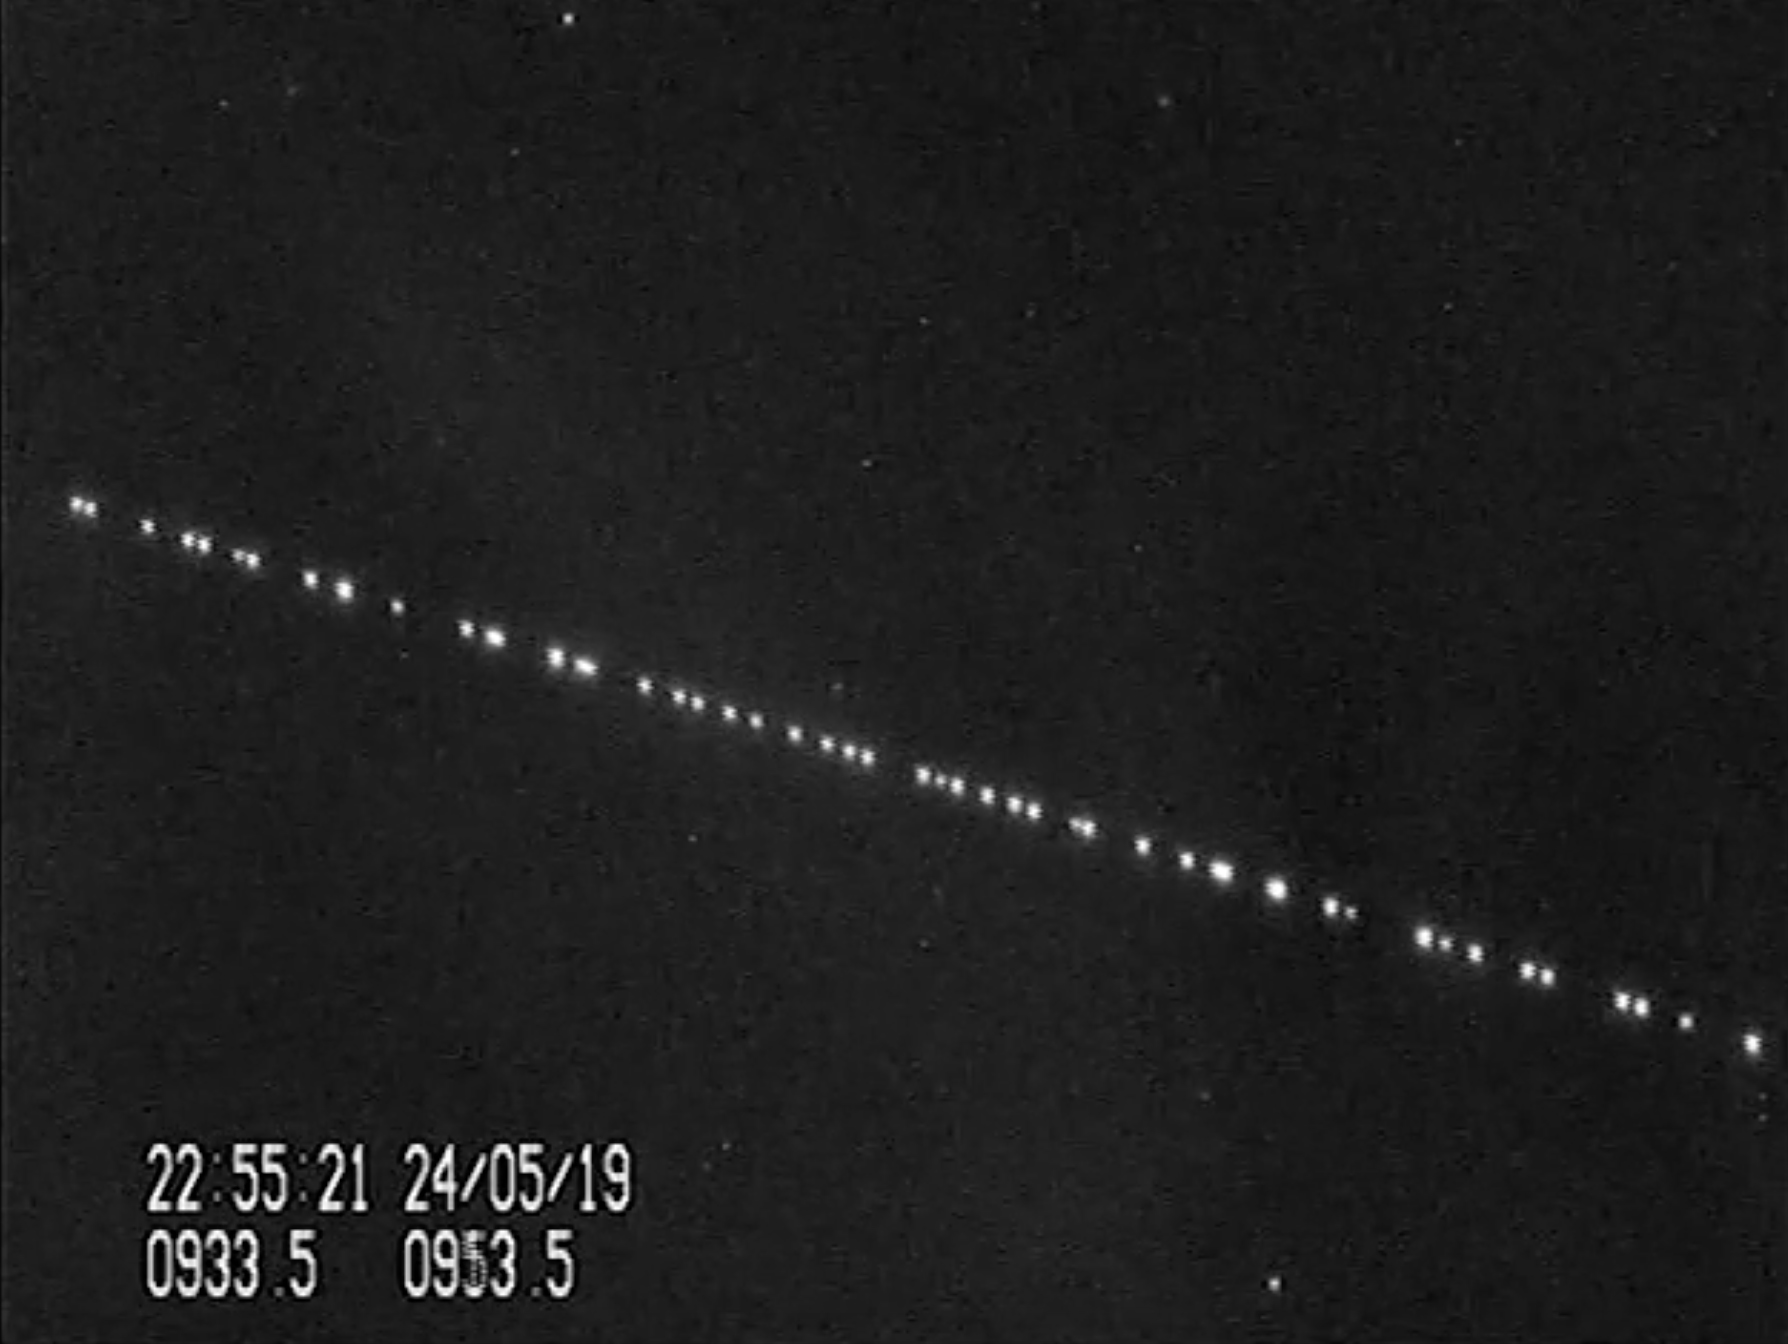 A train of SpaceX Starlink satellites are visible in the night sky in this still from a video captured by satellite tracker Marco Langbroek in Leiden, the Netherlands on May 24, 2019, just one day after SpaceX launched 60 of the Starlink internet communications satellites into orbit.